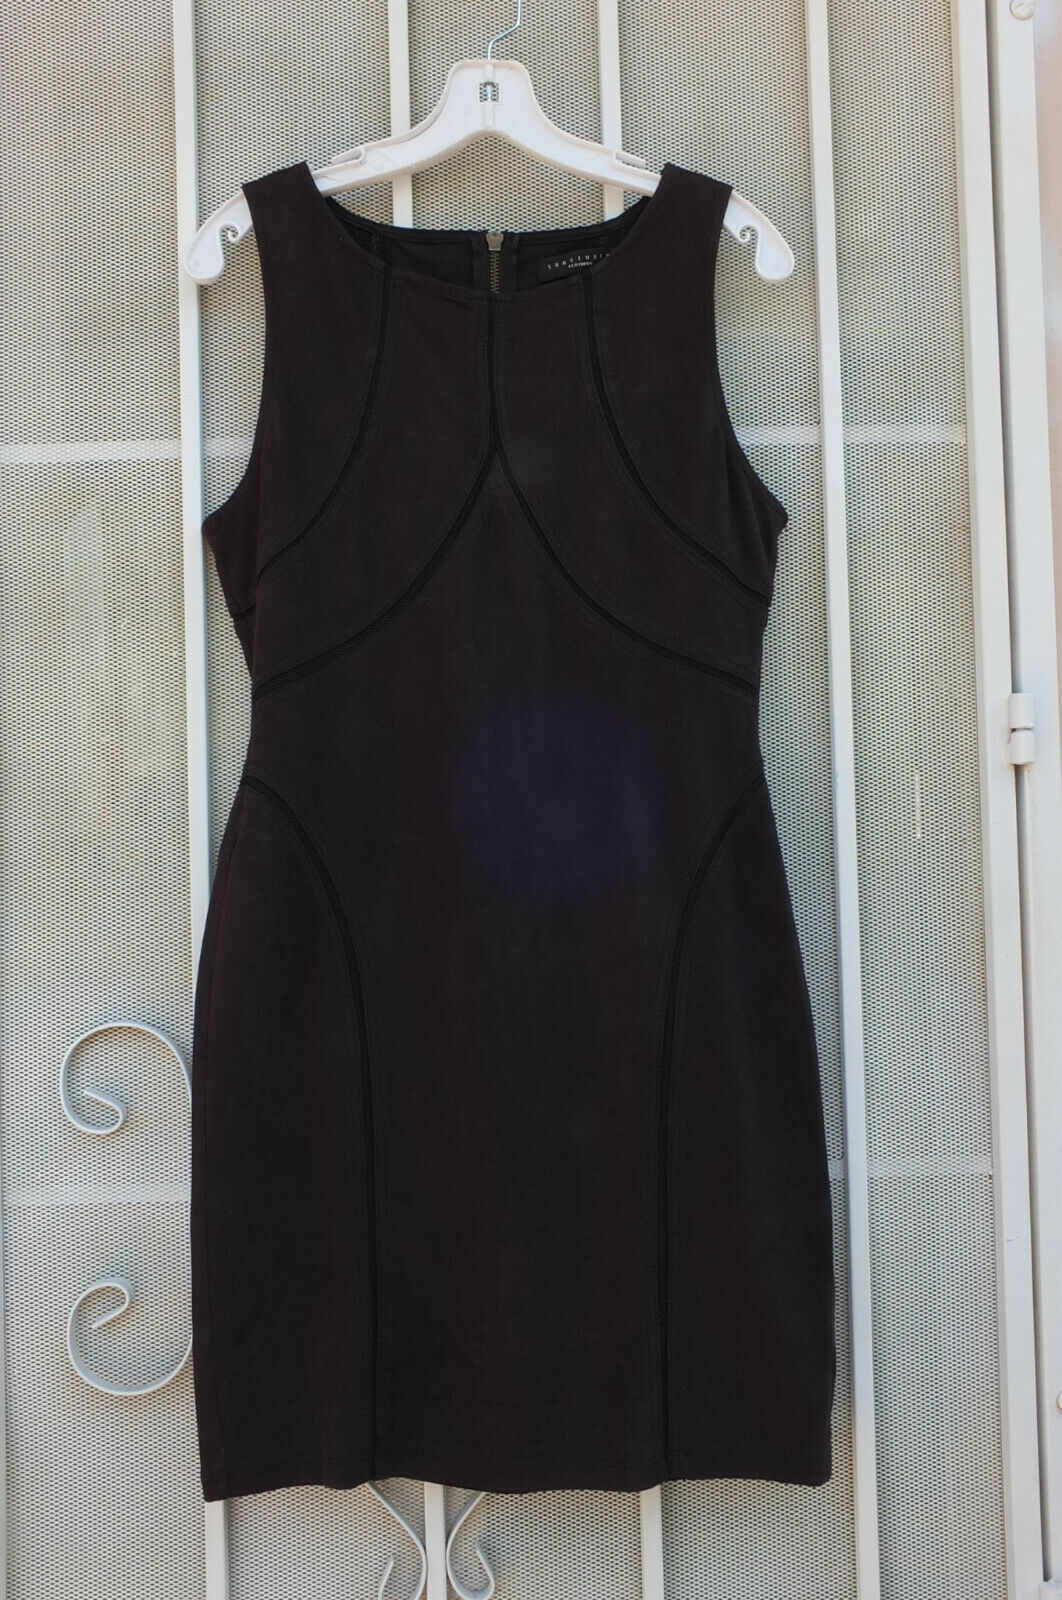 Primary image for SANCTUARY ~ Sz M Black Vegan Suede Sleeveless Shapely Party Dress ~ SHIPS FREE